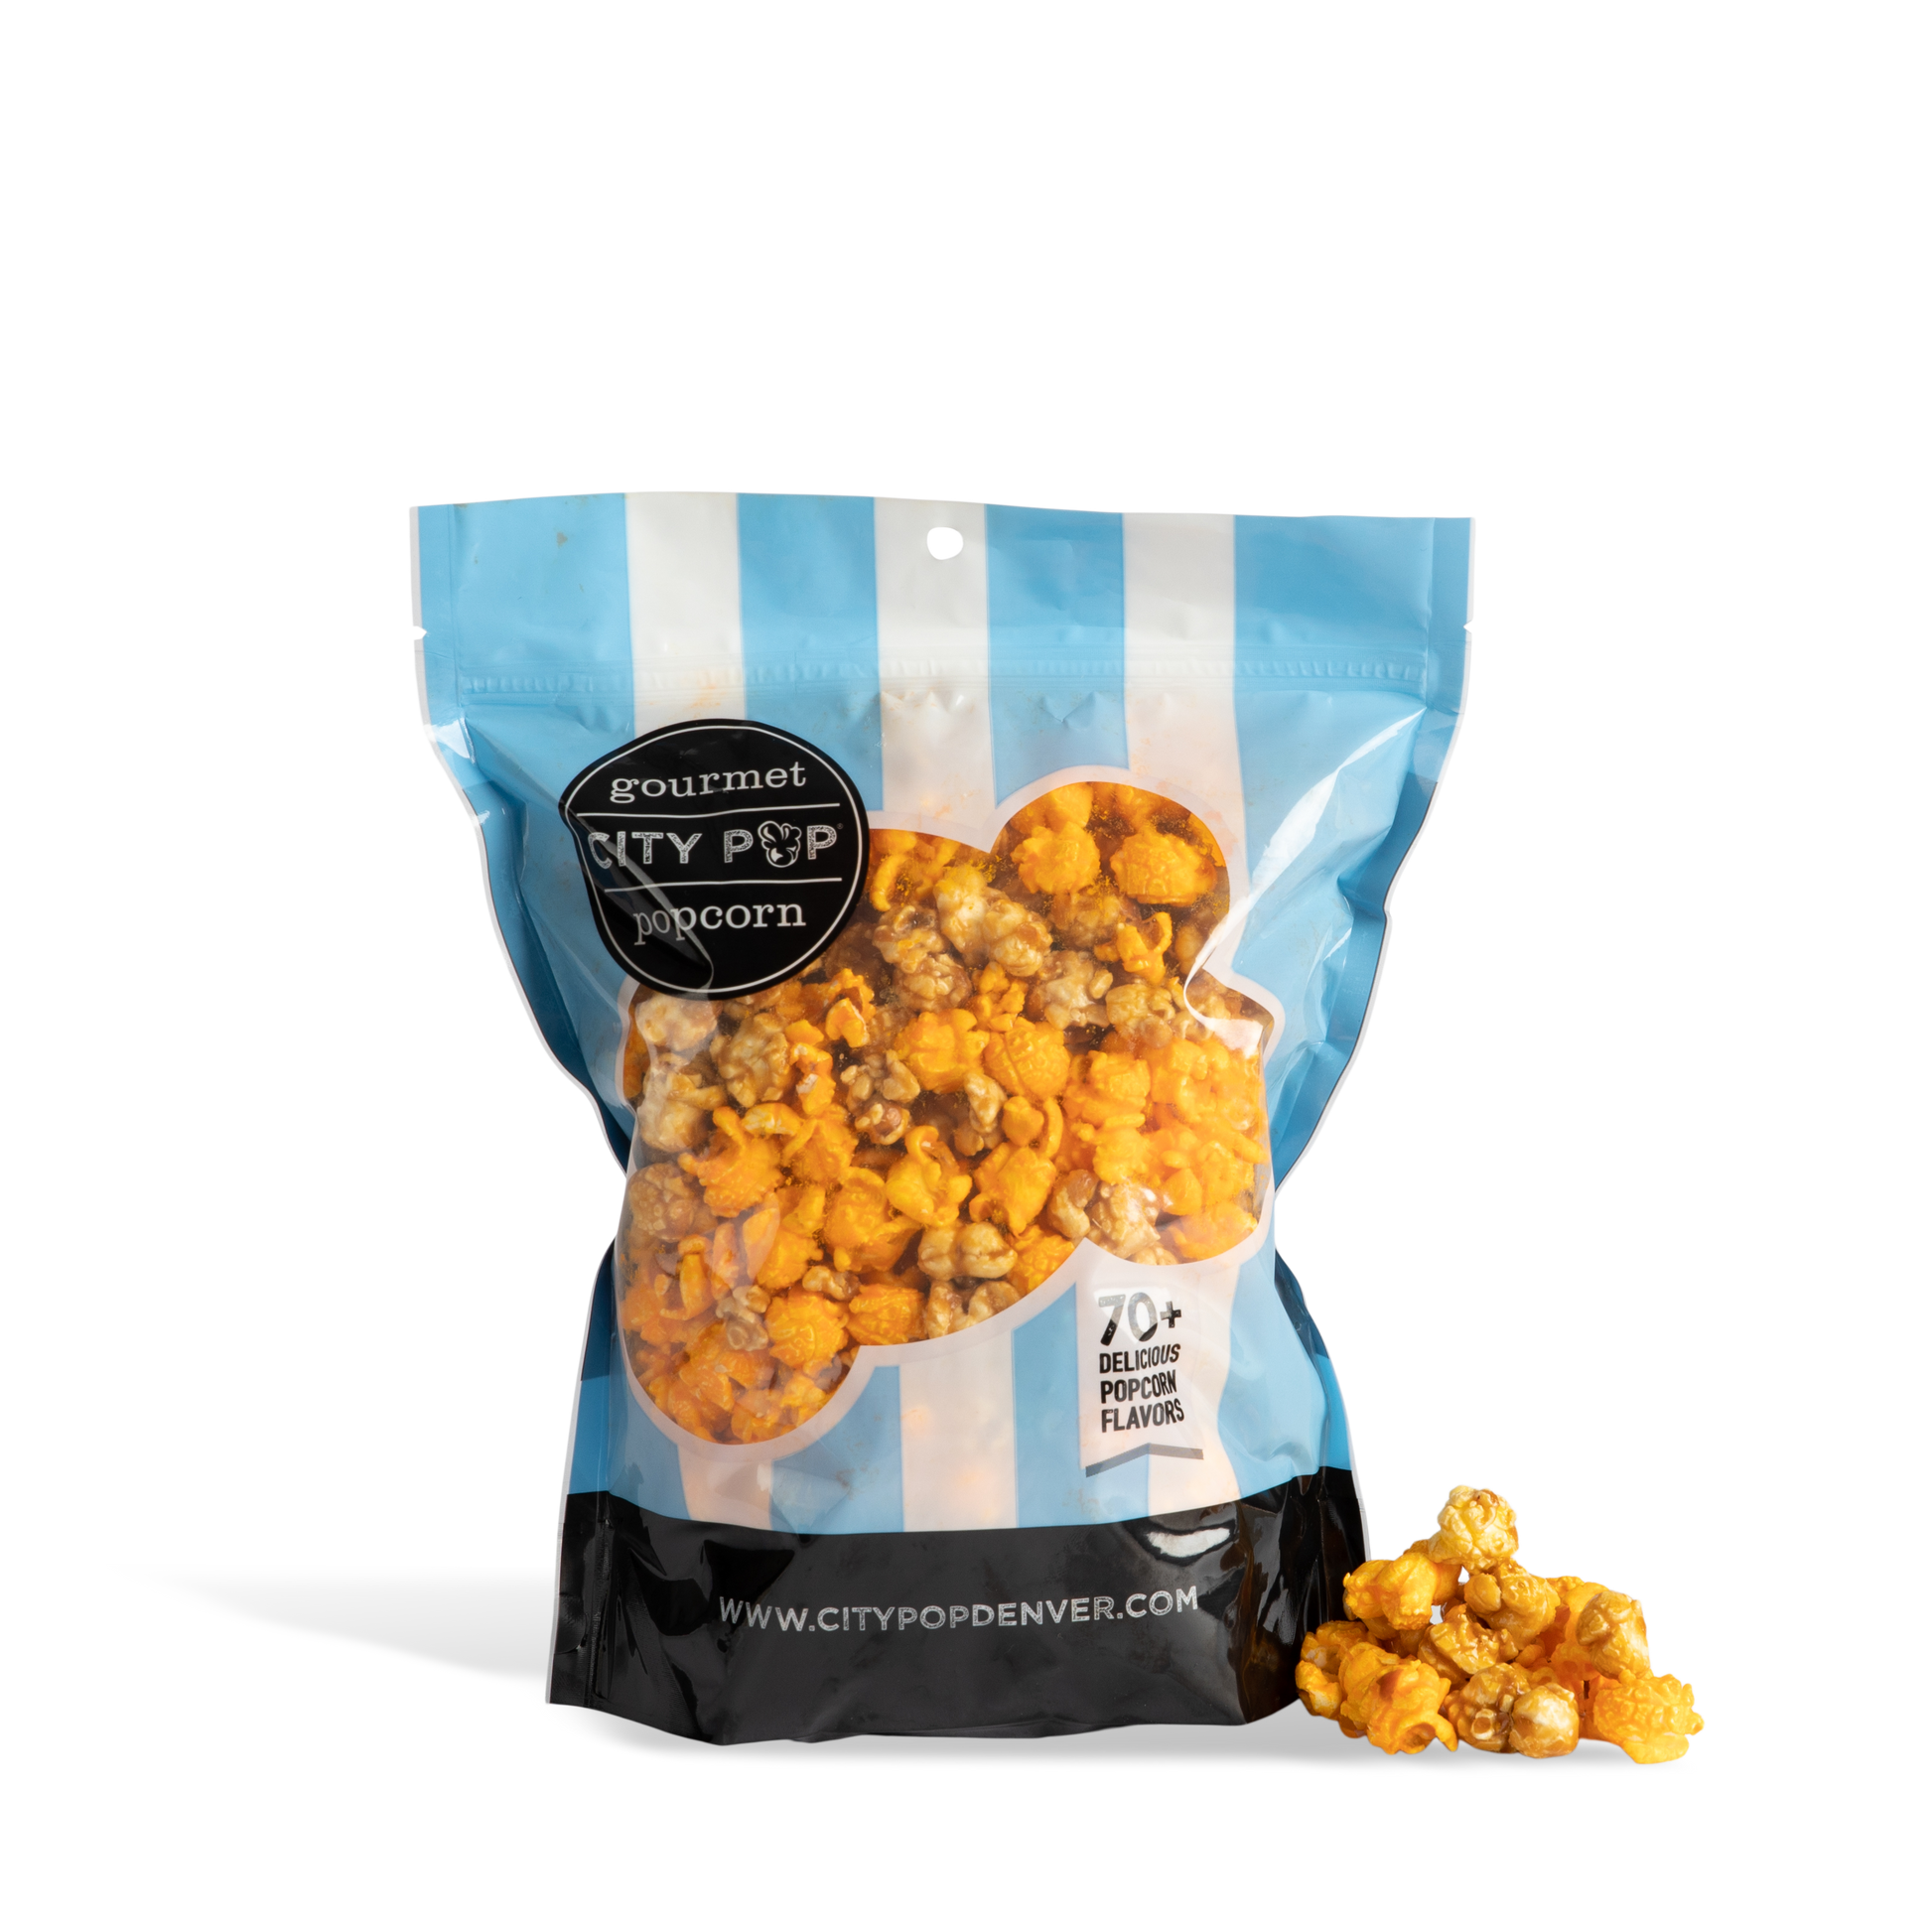 City Pop Cheese & Caramel Mix Popcorn Bag With Kernel